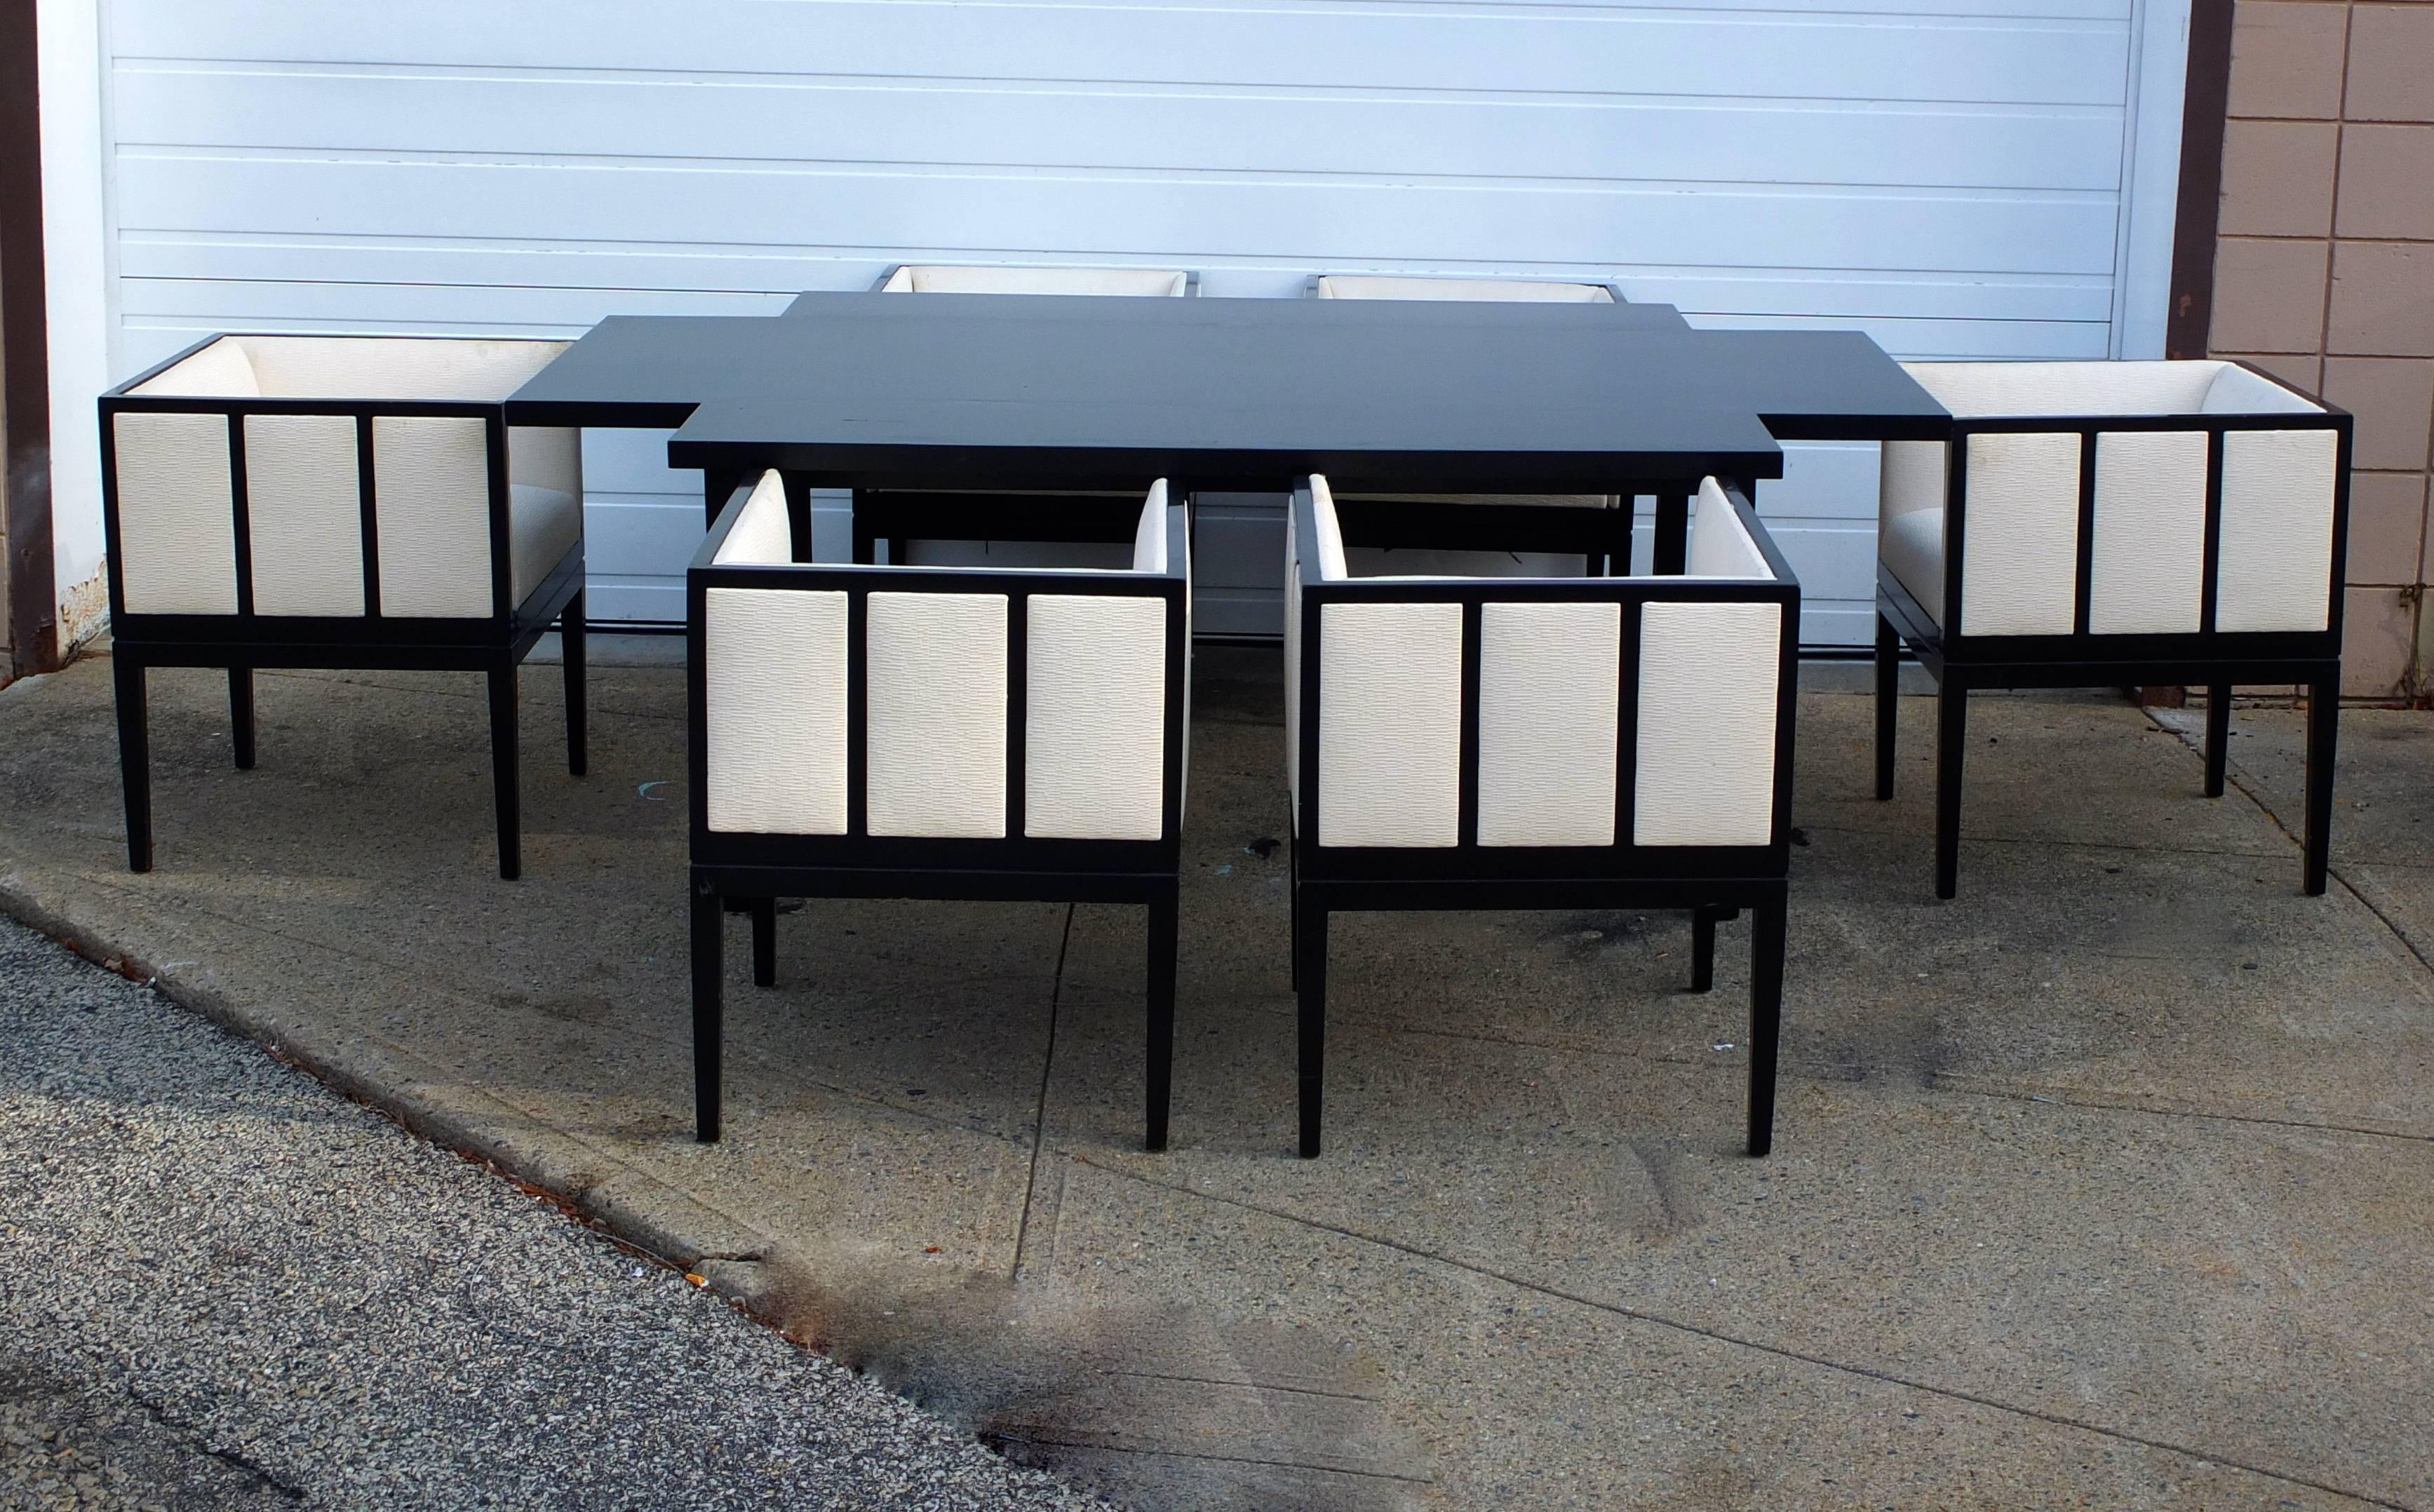 Mid-20th Century Grid Form Dining Table Attributed to Ward Bennett for Brickel Associates